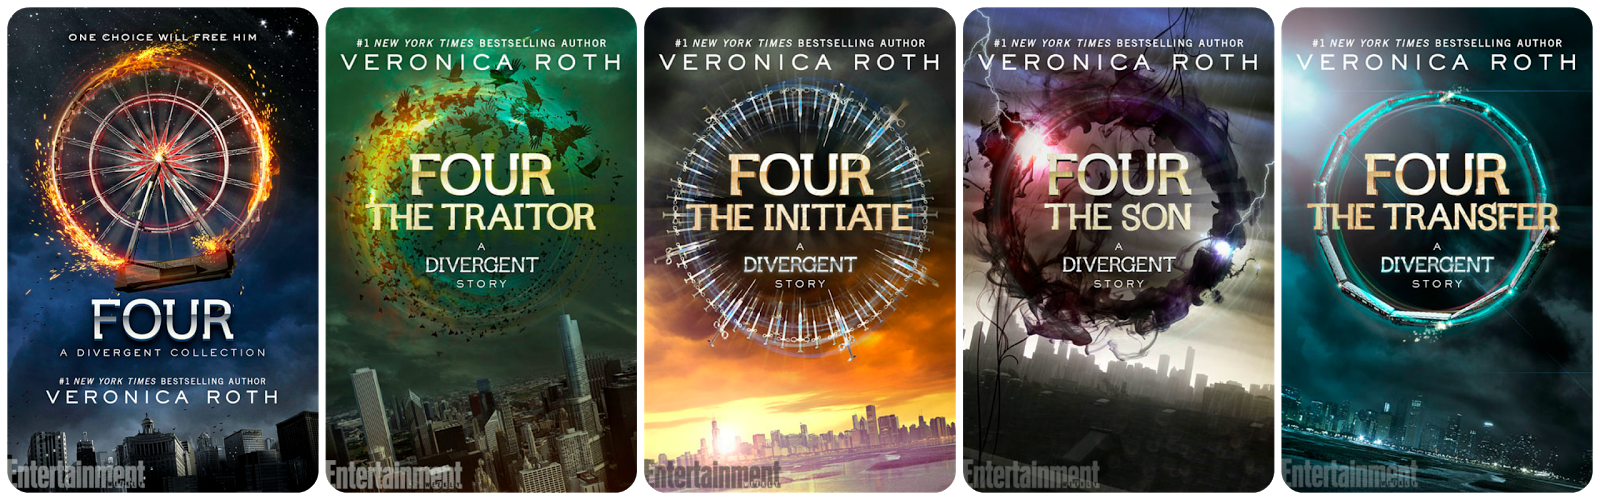 Veronica Roth Four Series Order